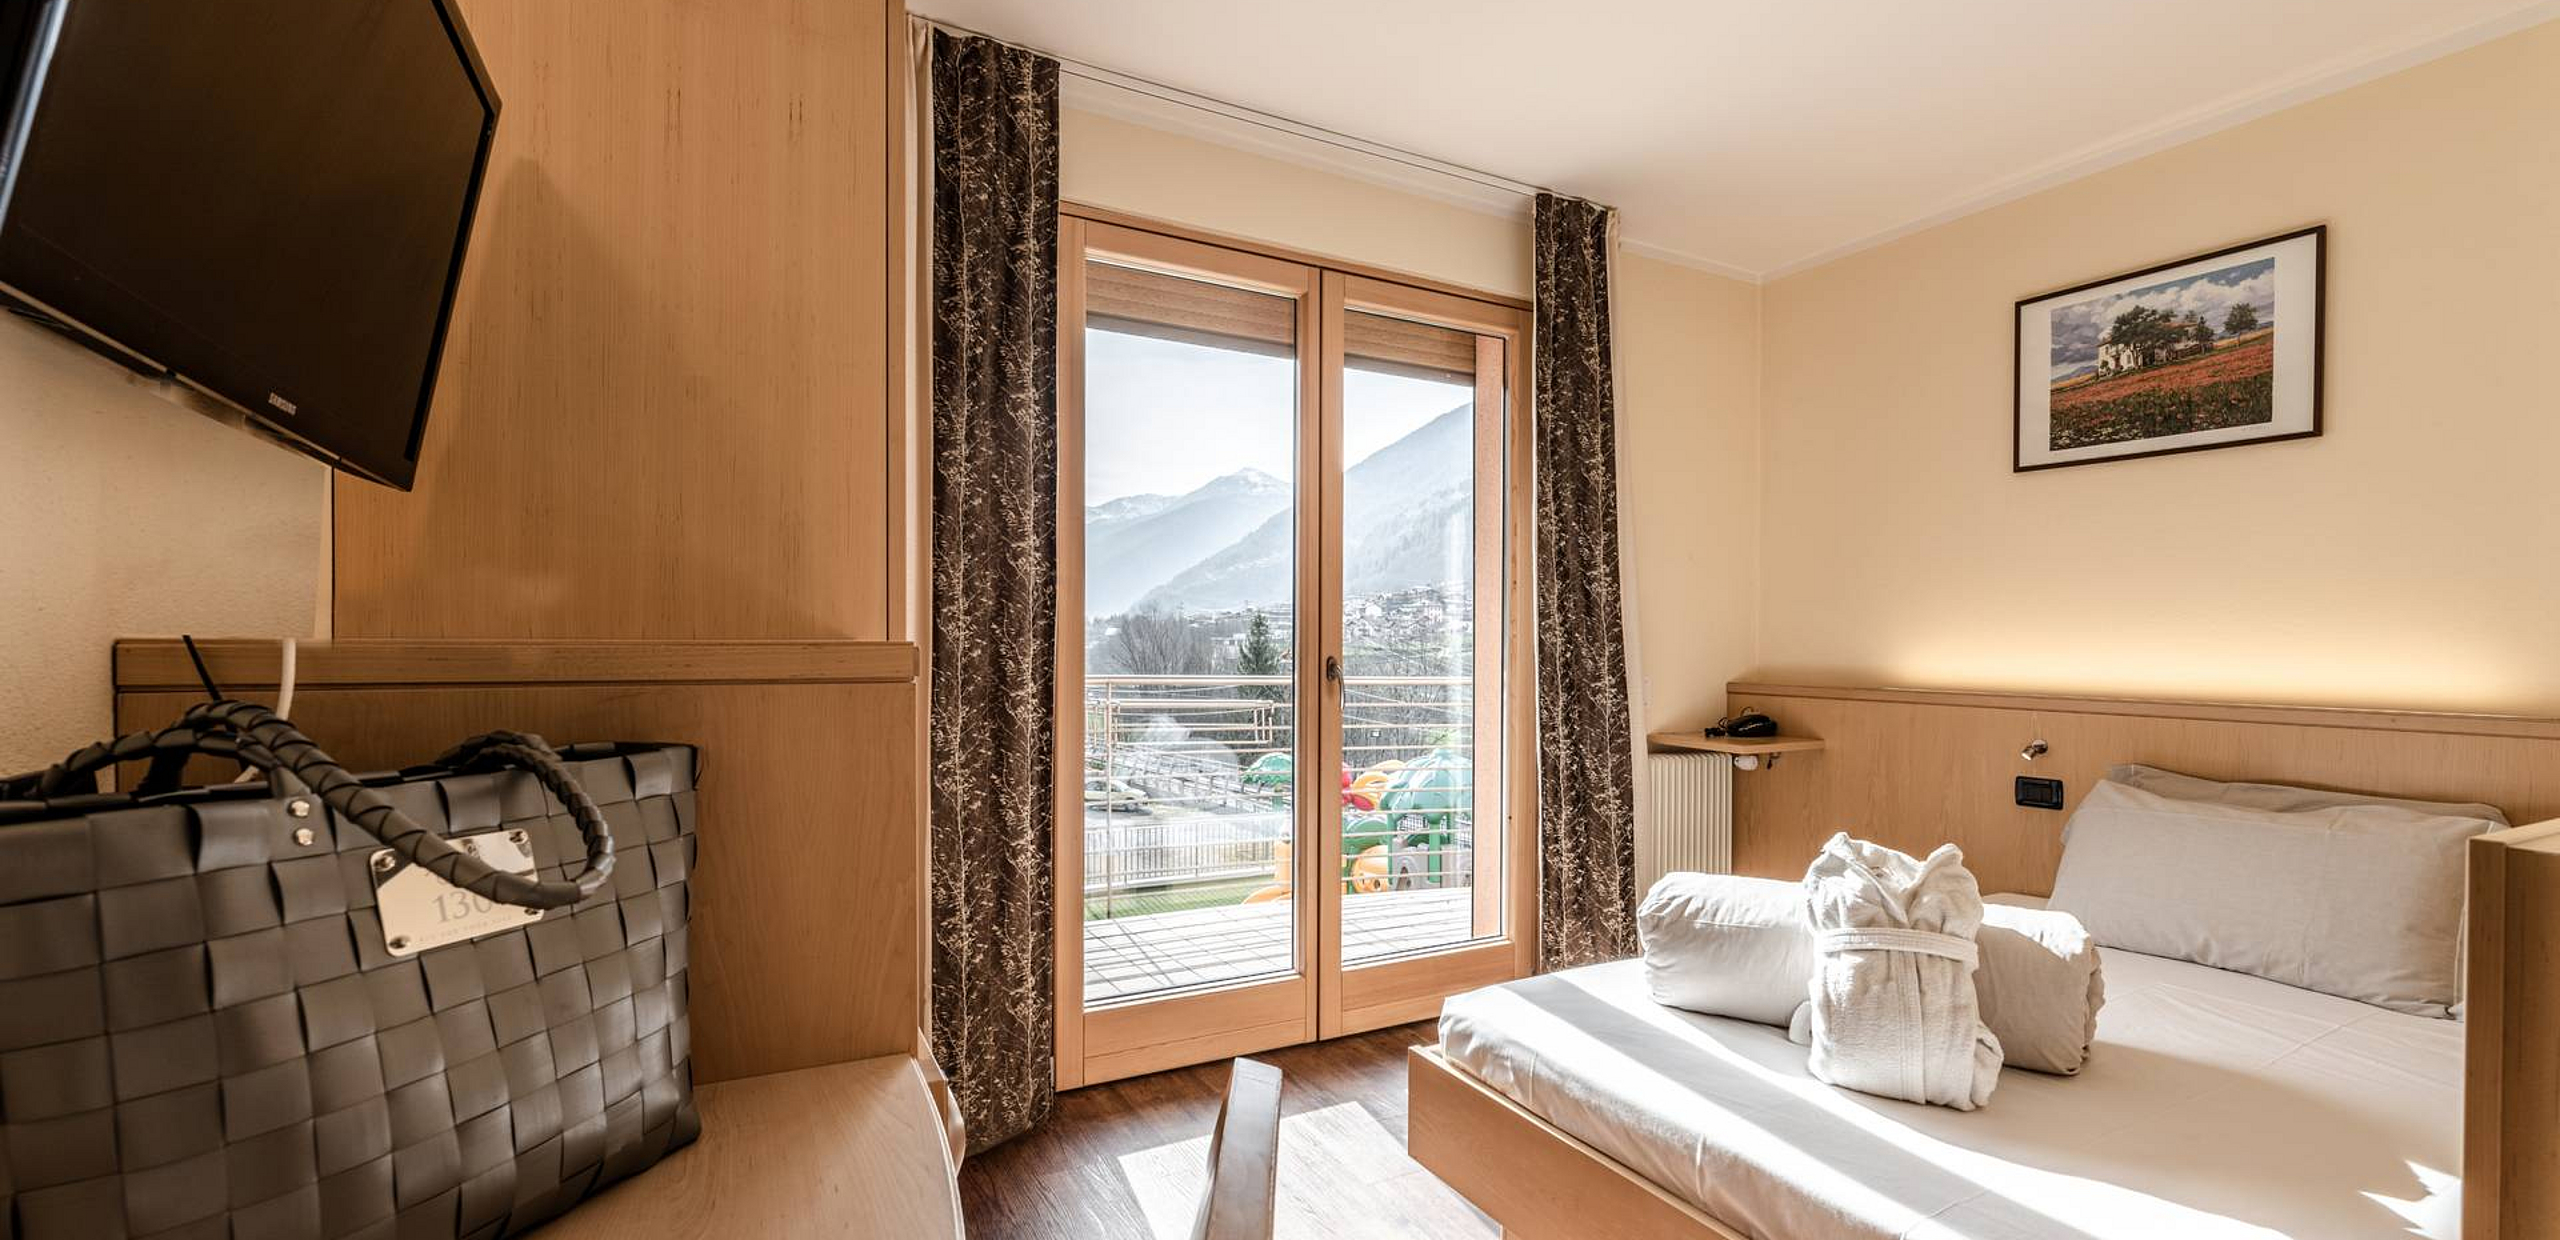 Single room at the sport hotel in Val di Sole